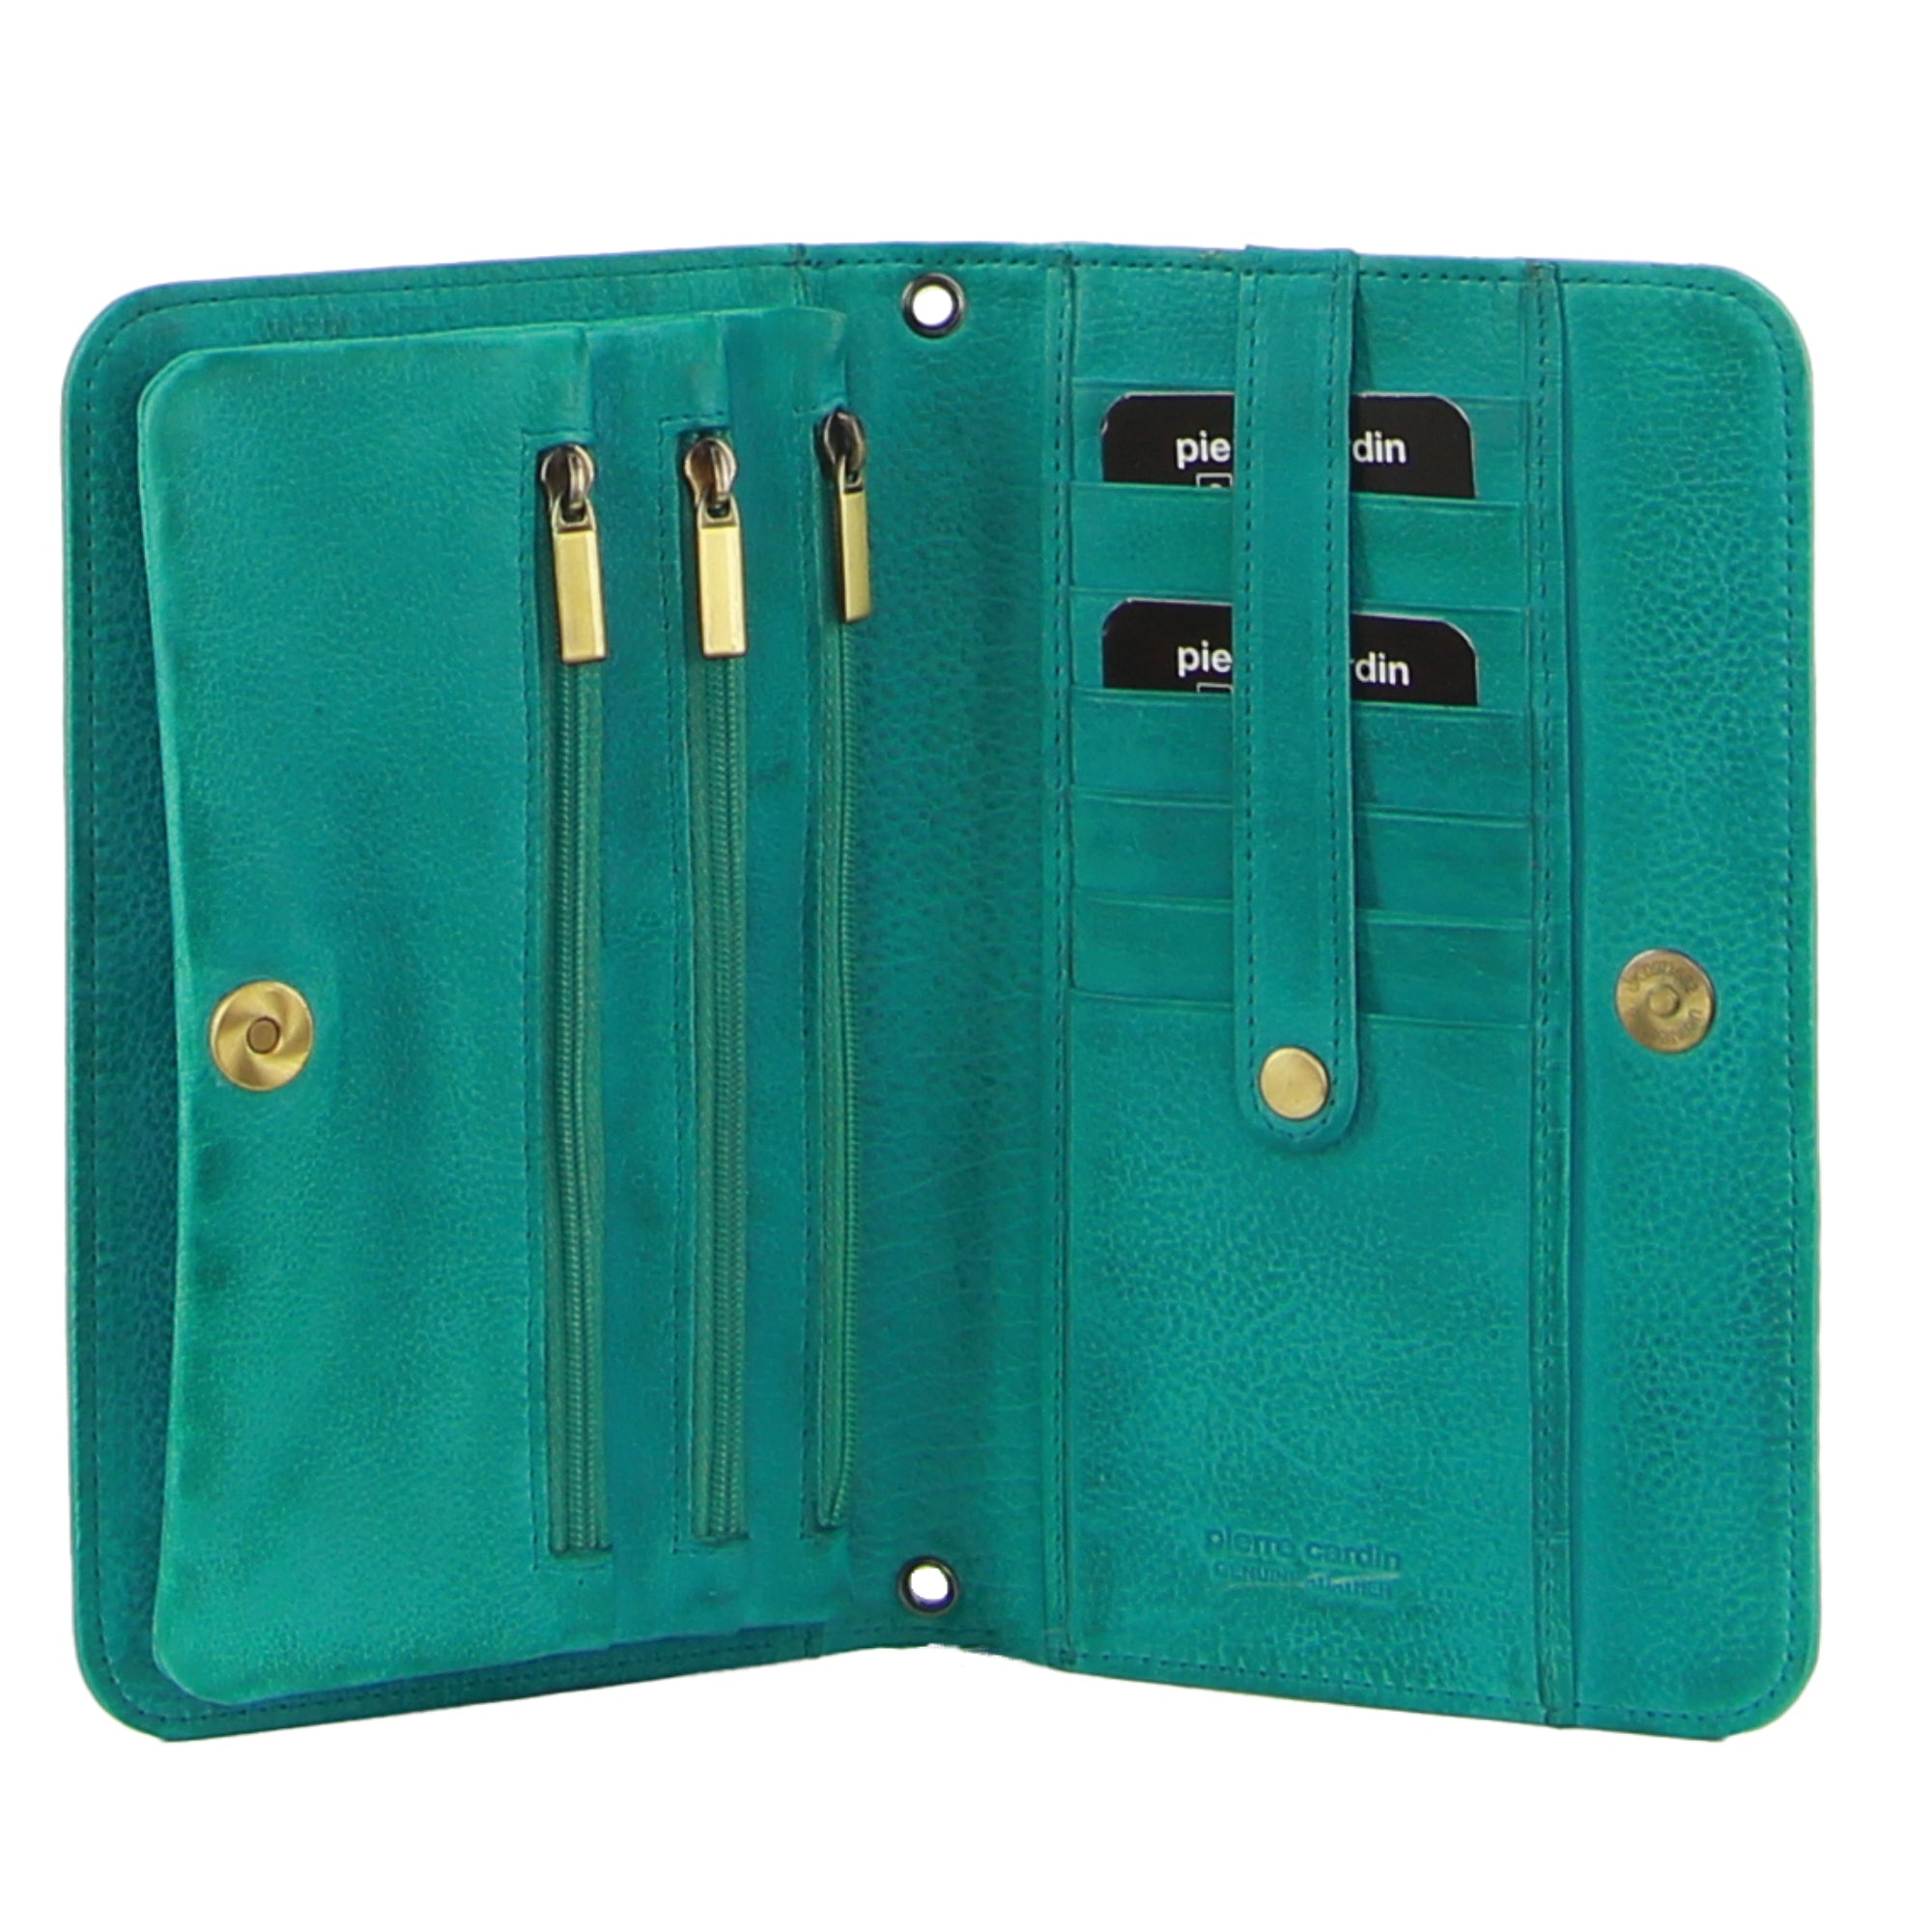 Pierre Cardin Genuine Leather Clutch/Wallet Bag in Turquoise